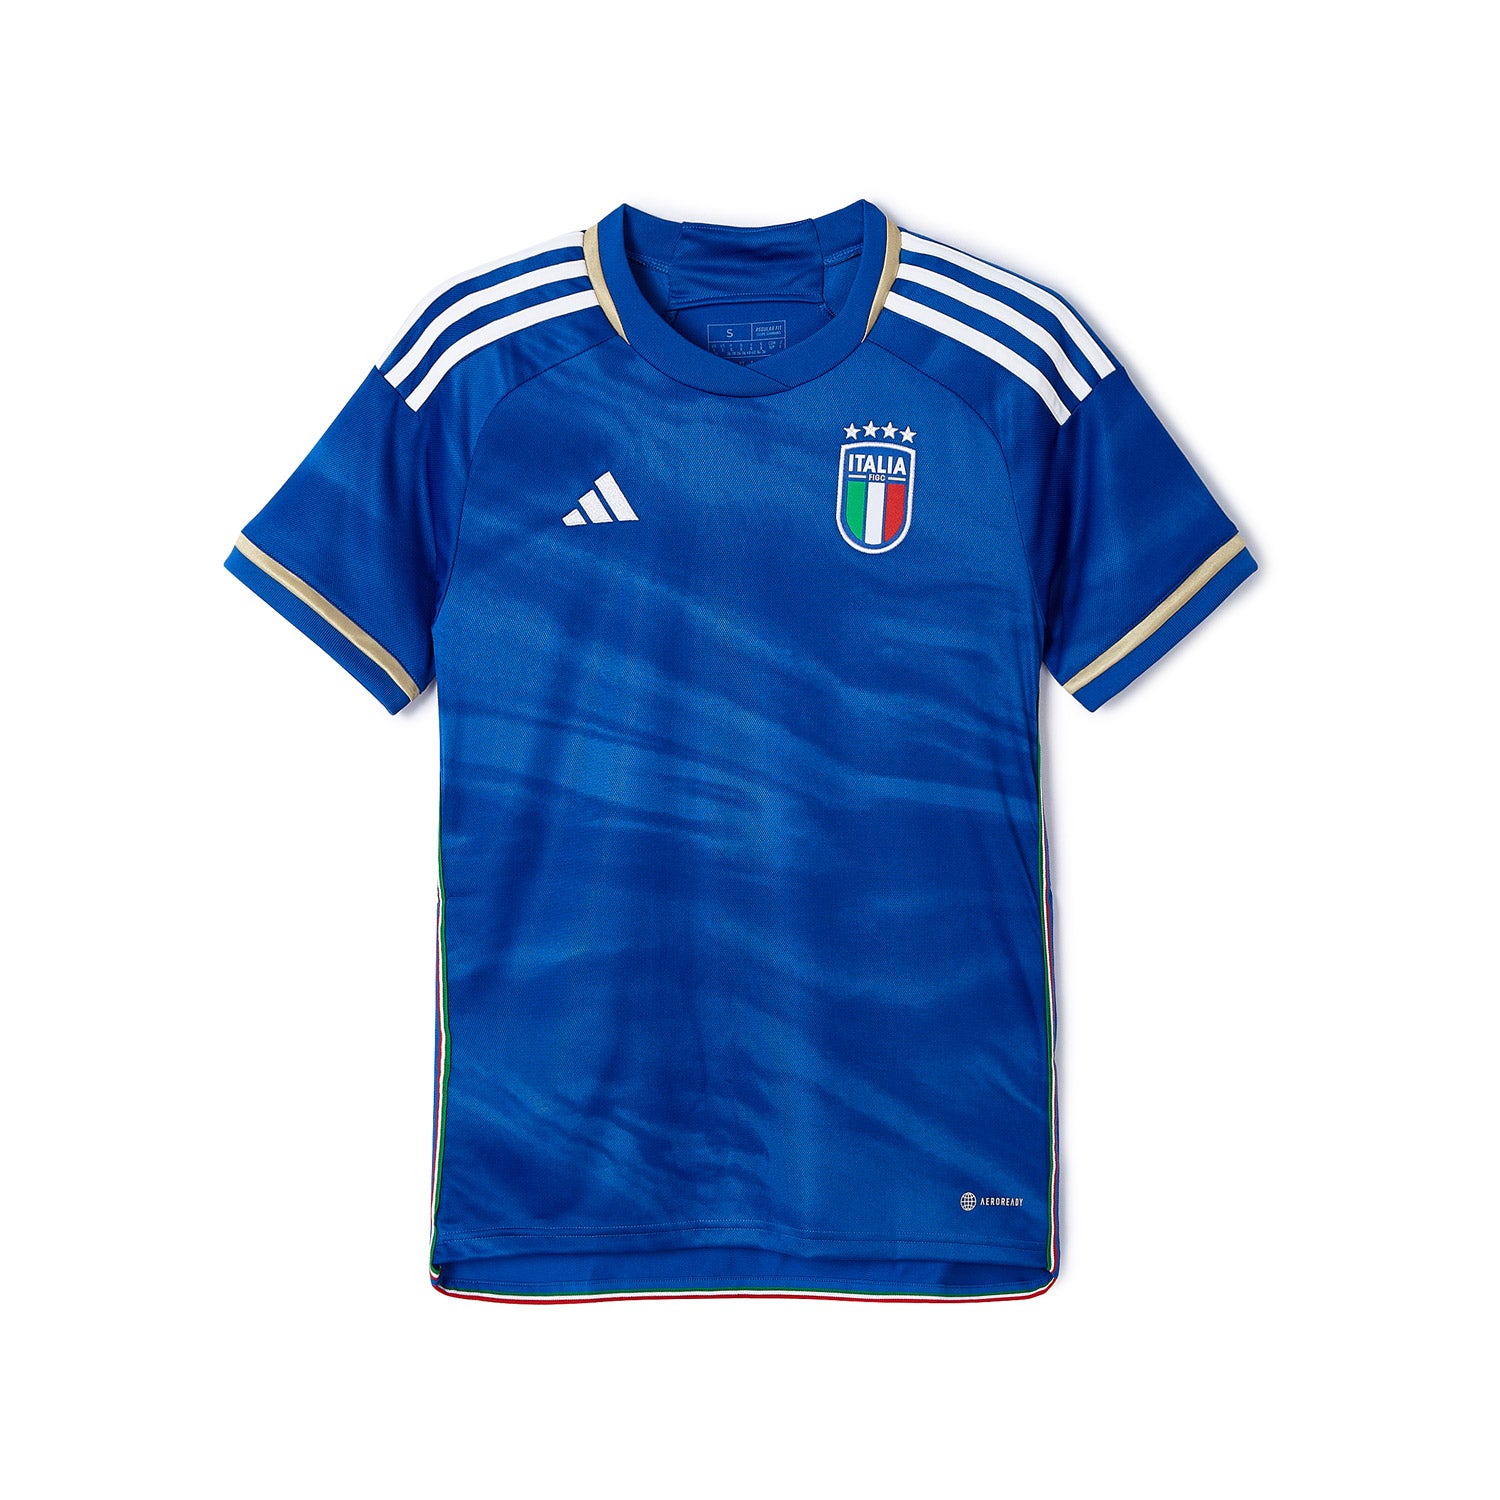 adidas Italy National Team Soccer Jackets for sale